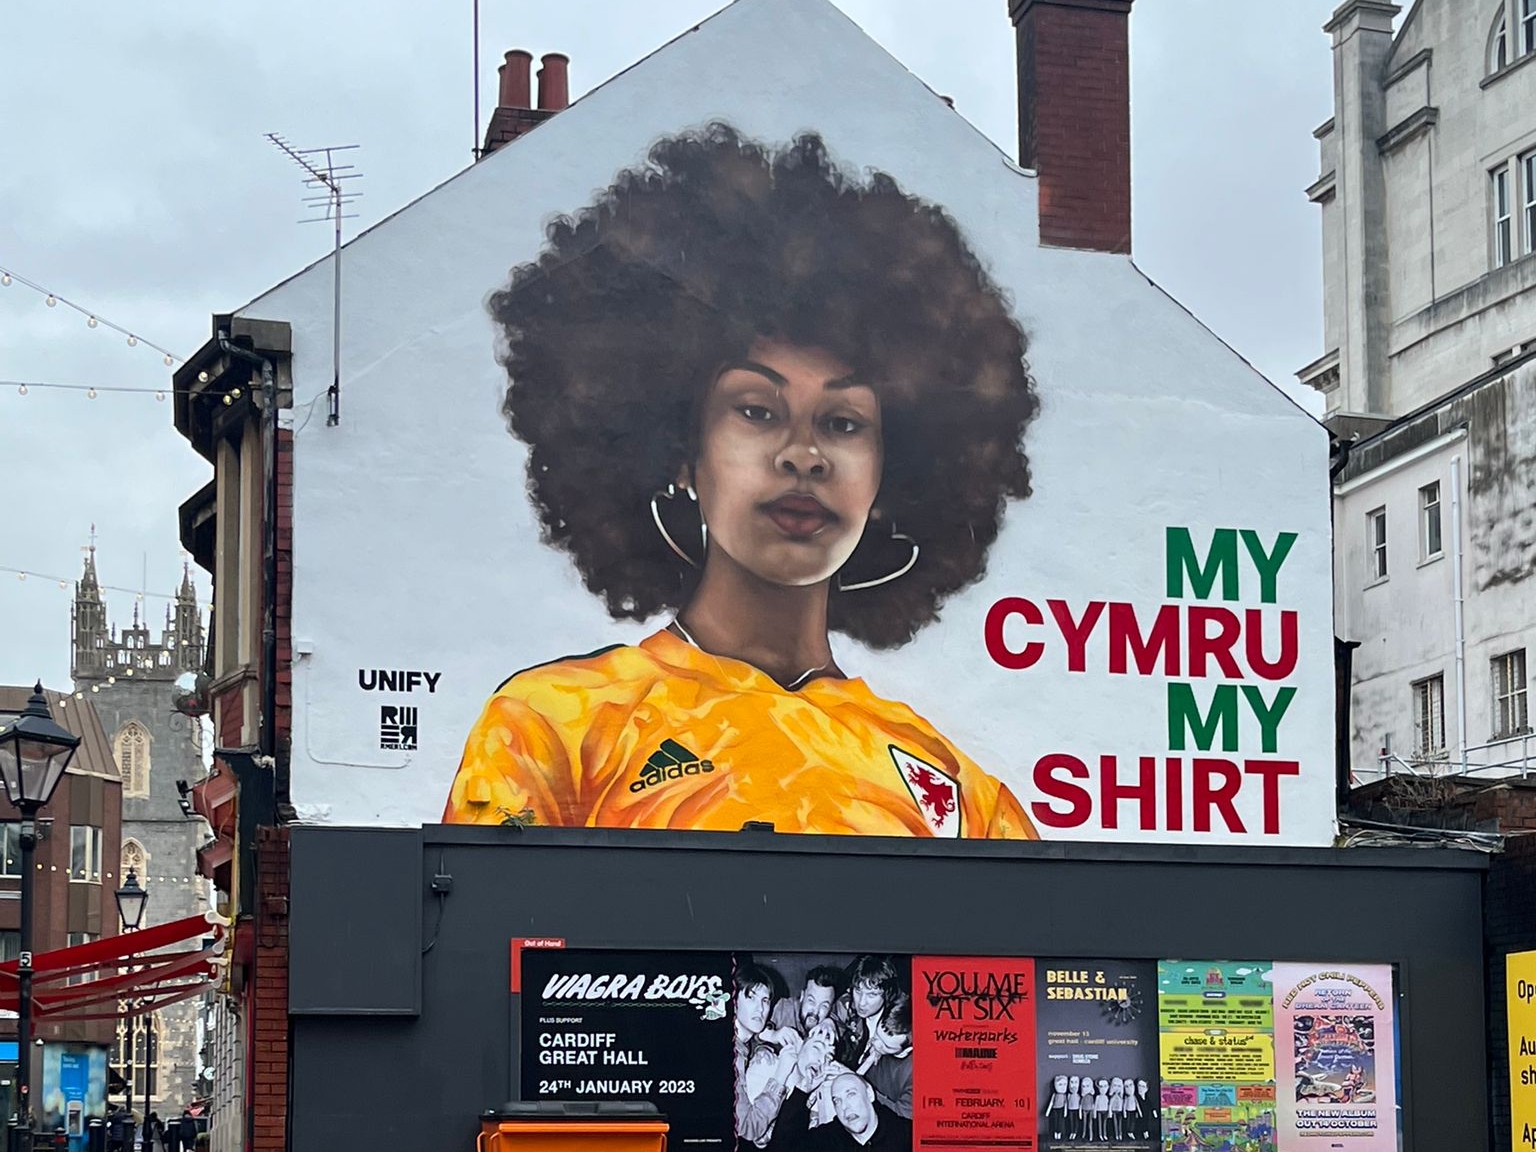 My City, My Shirt Celebrates The Rich Culture of Cardiff While Tackling  Racism in Football - BRICKS Magazine